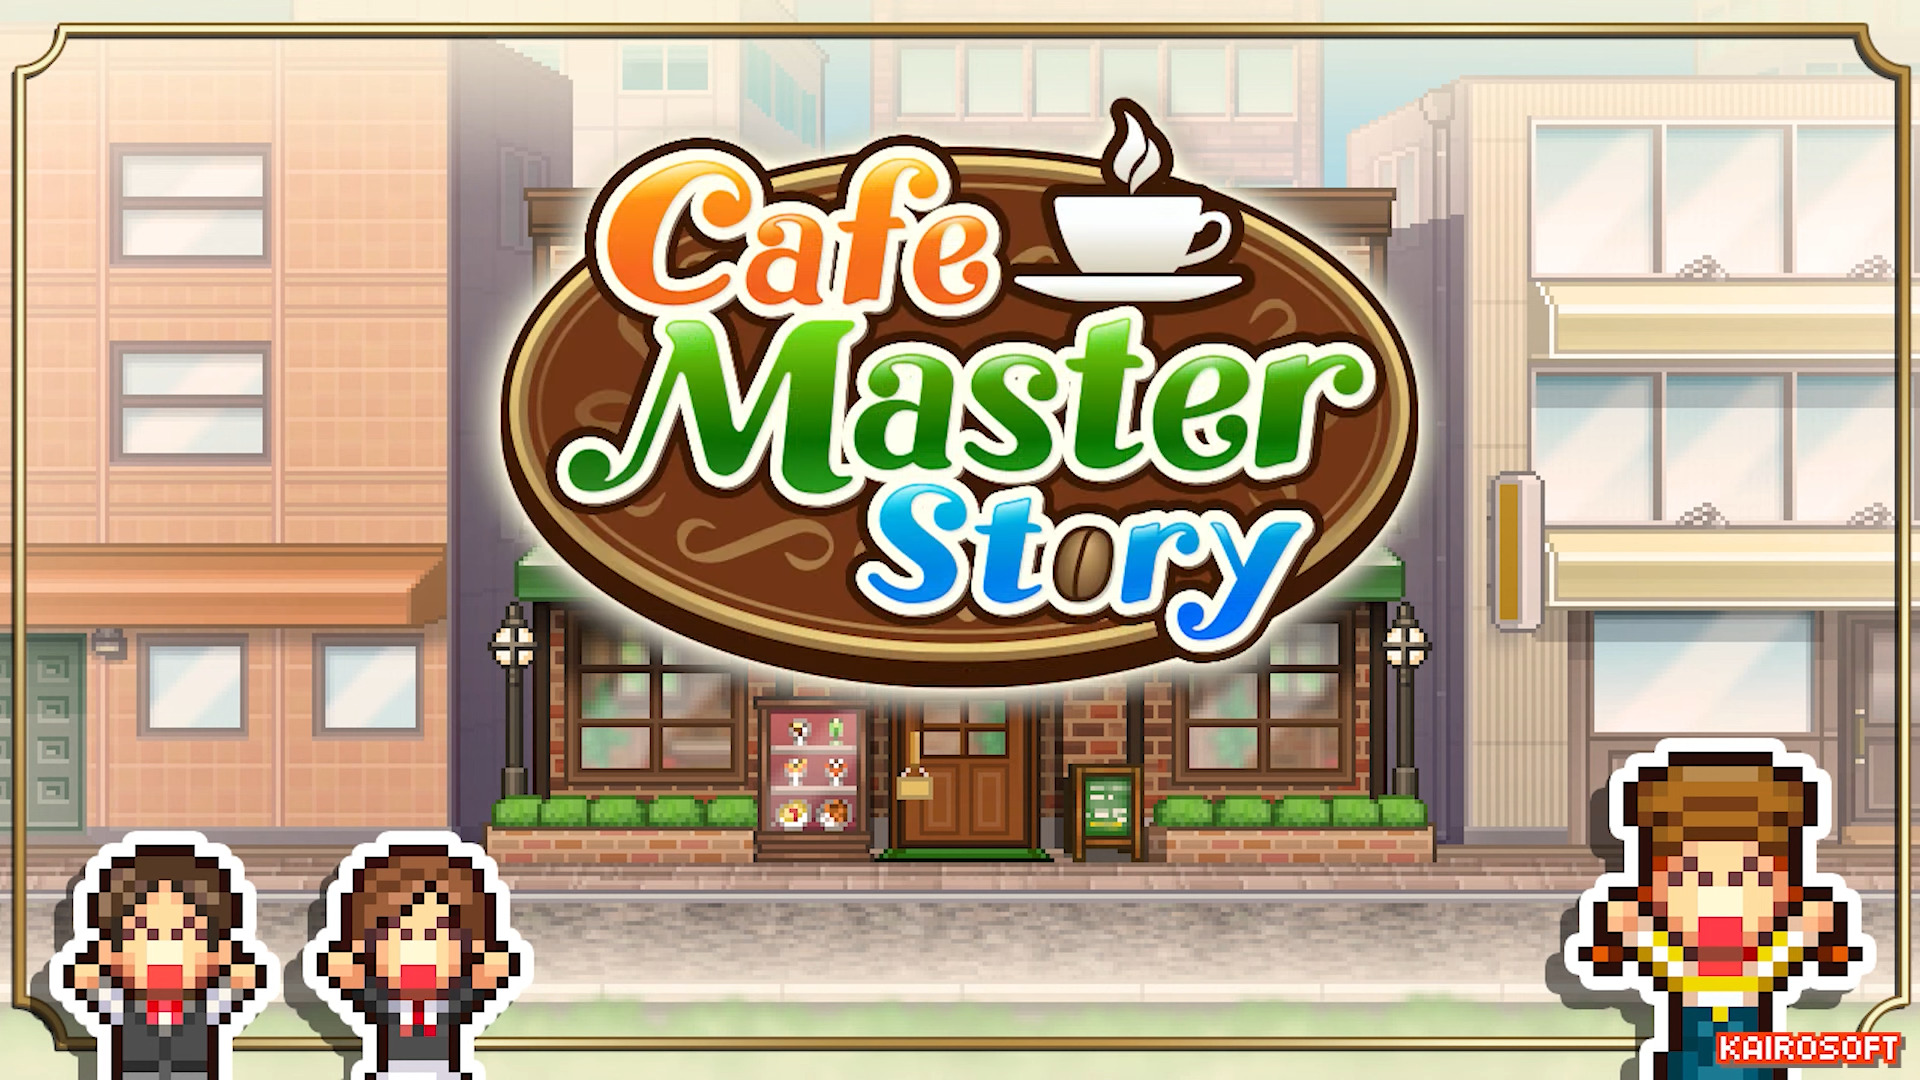 Full version of Android Economy strategy game apk Cafe Master Story for tablet and phone.